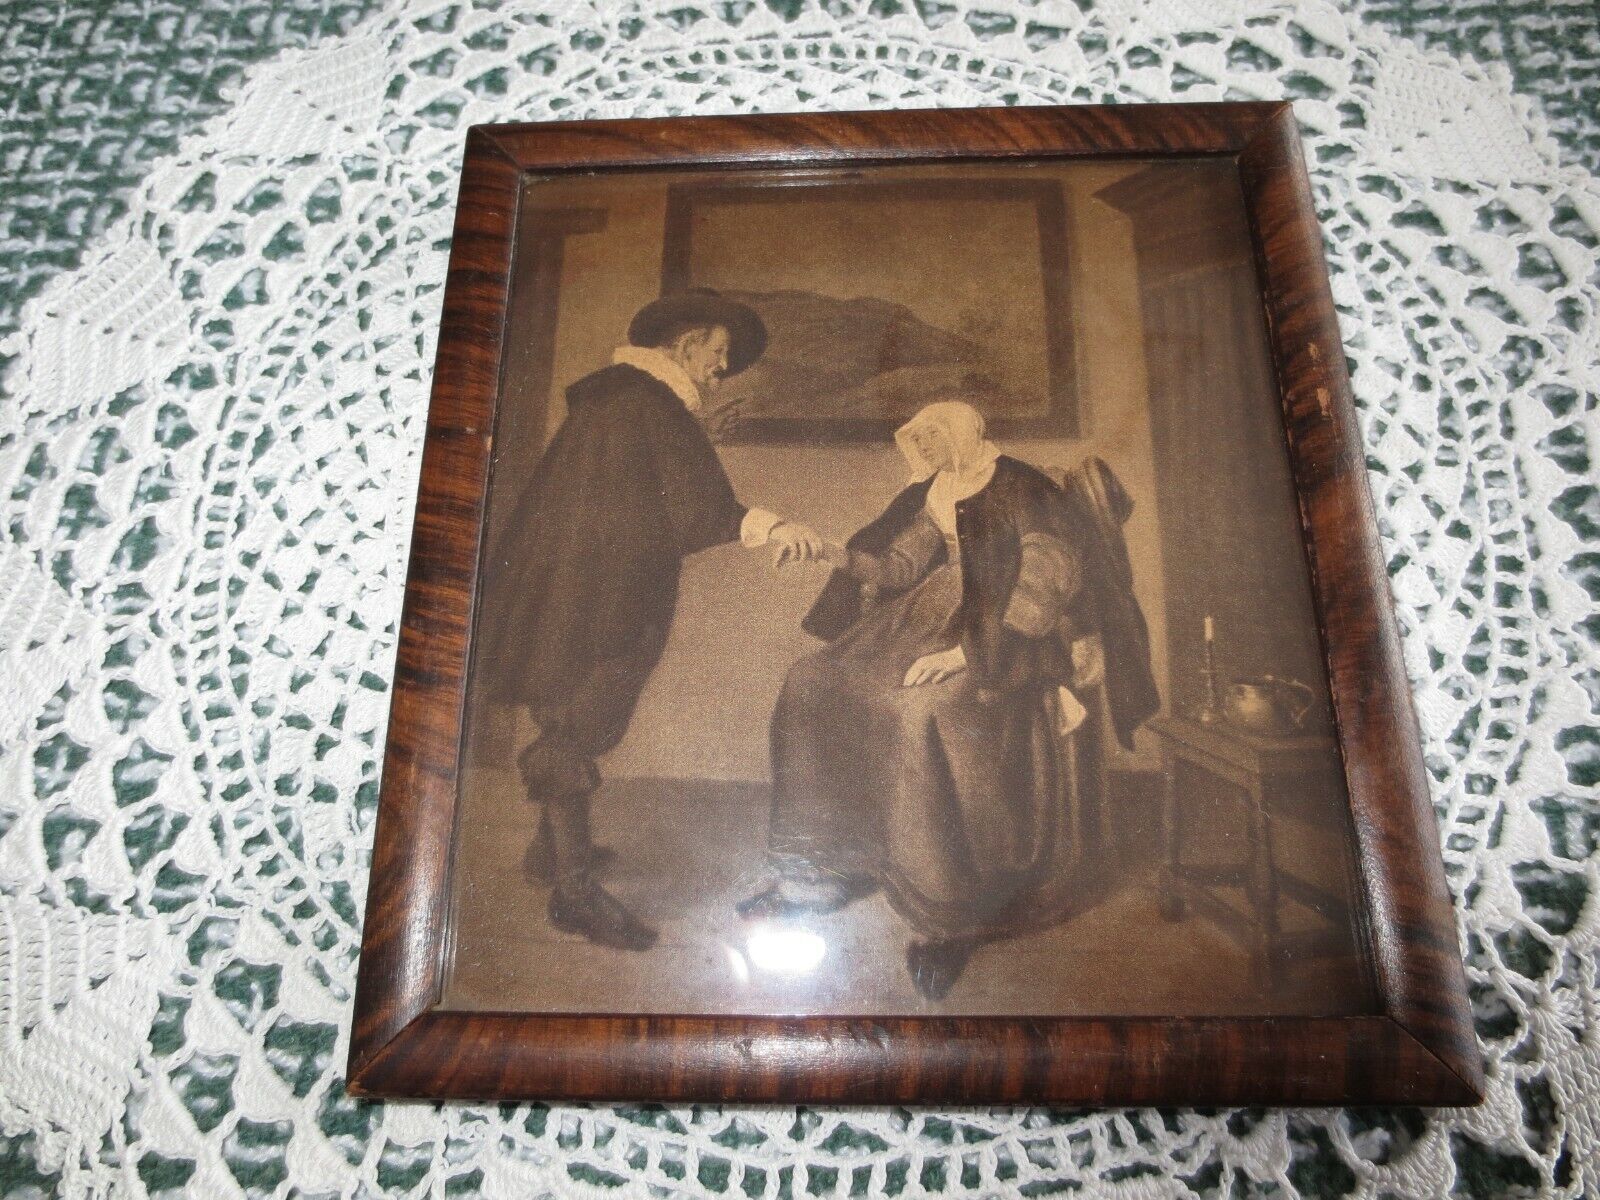 Primary image for Antique ERA COUPLE PRINT in John Schullian ARTISTIC PICTURE FRAME - 5" x 5 1/2"